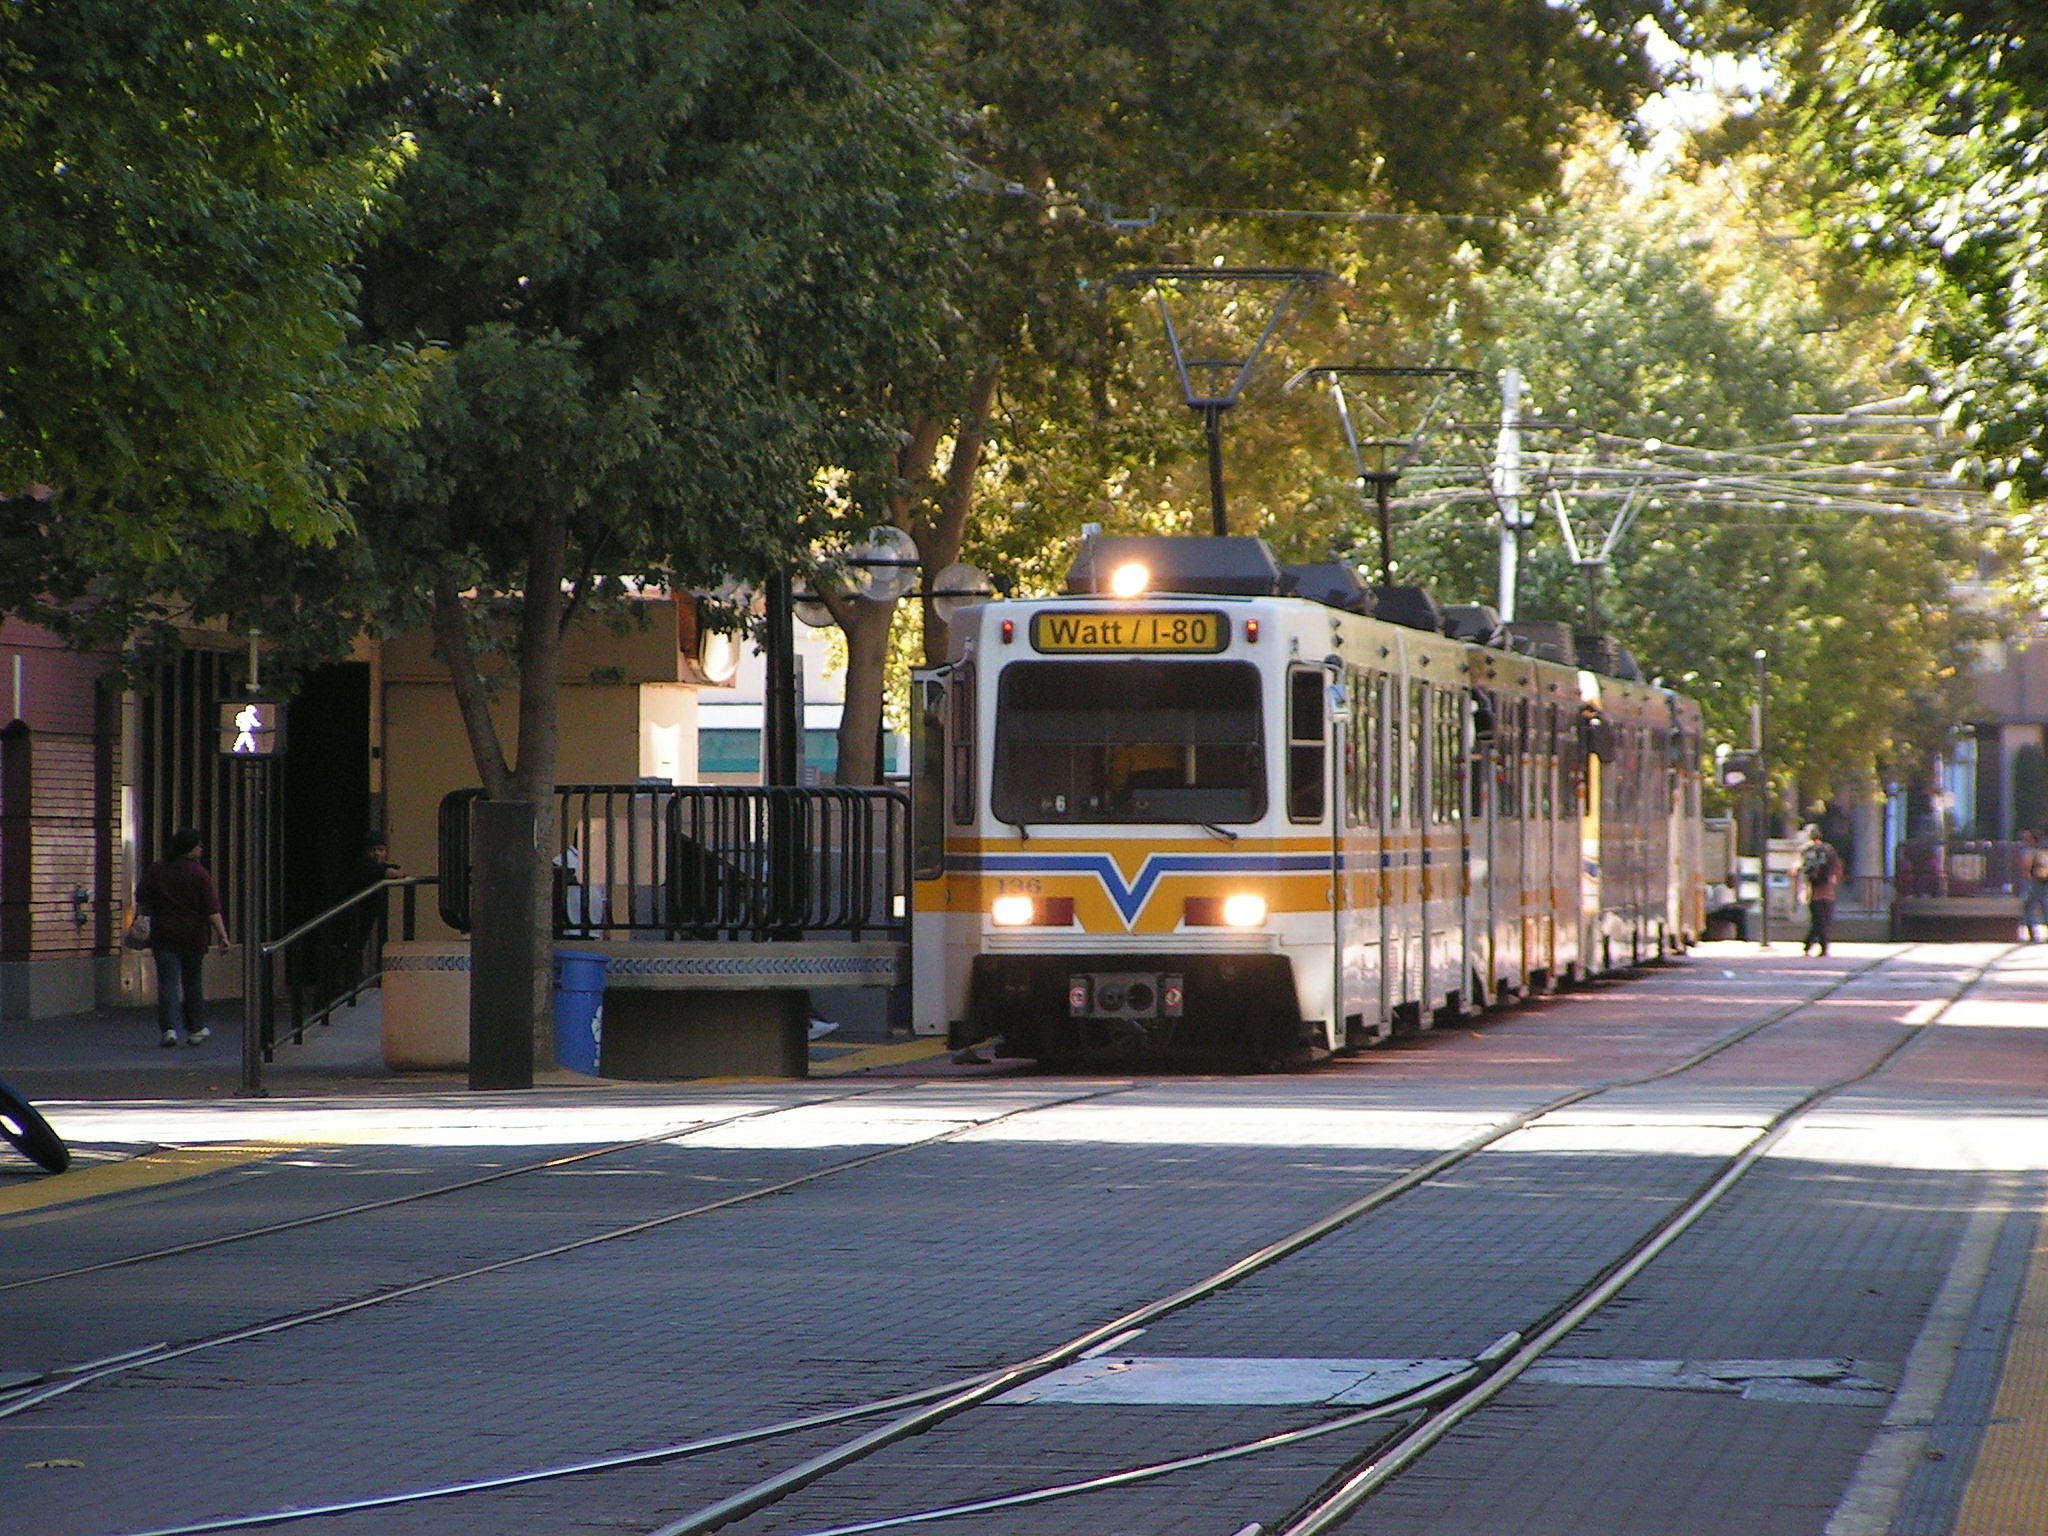 Sacramento's light rail will buy new vehicles with money from cap-and-trade proceeds. Image: Wikipedia